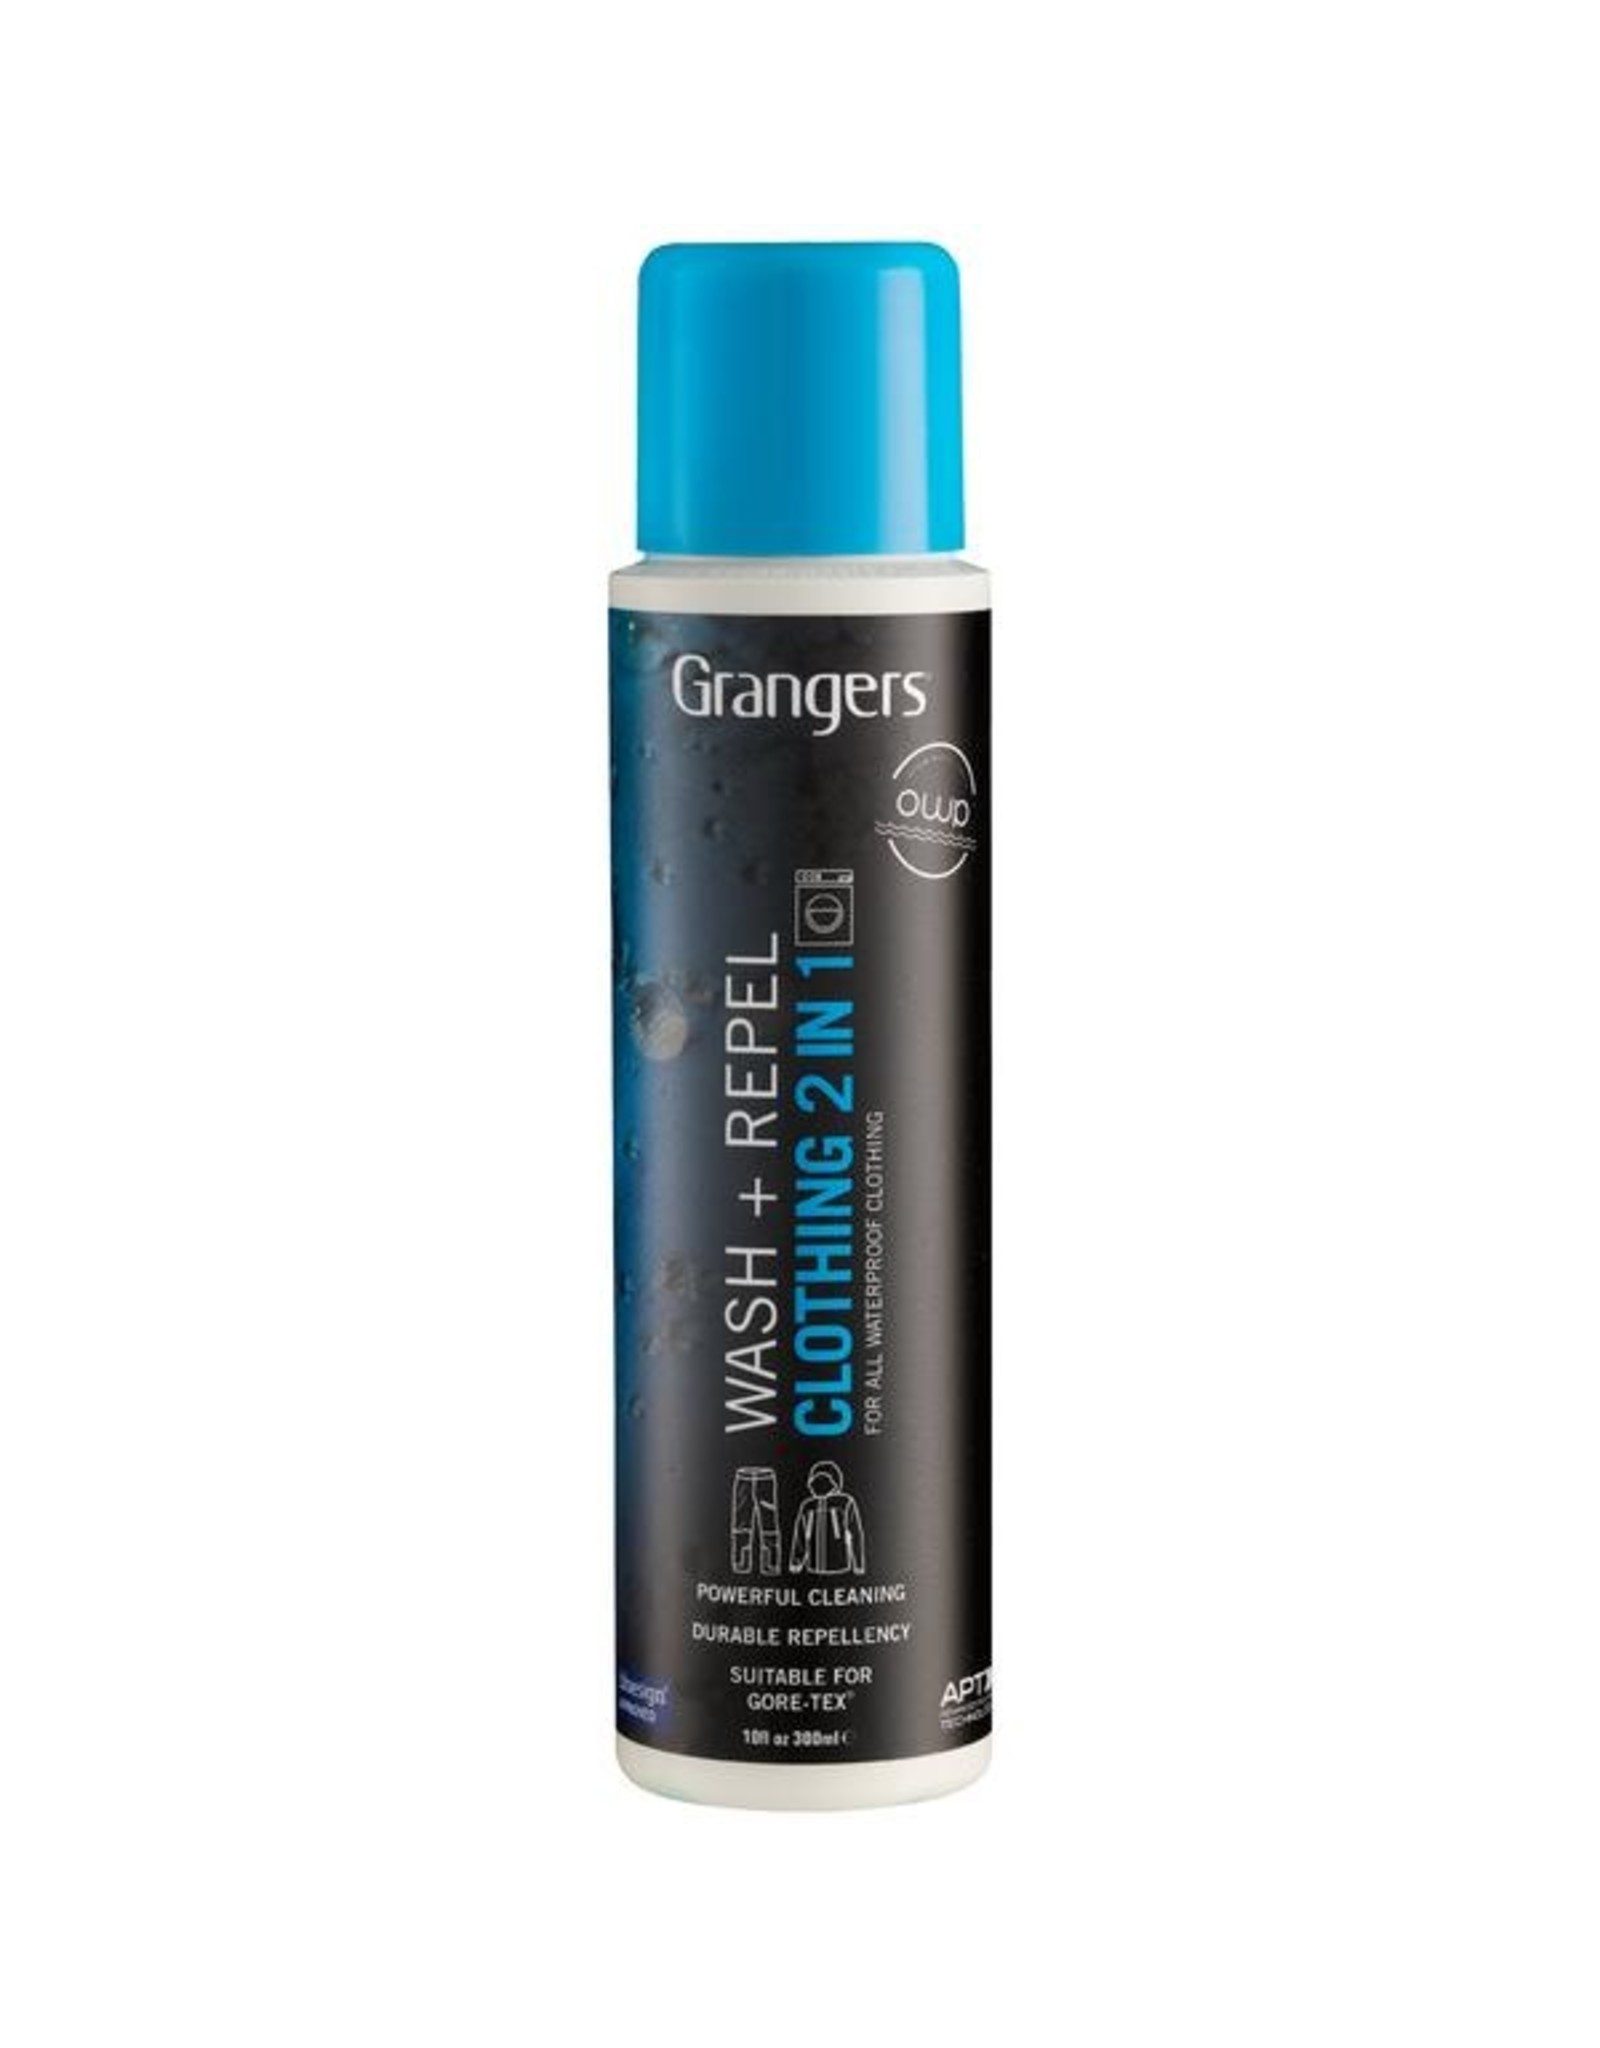 GRANGERS WASH & REPEL CLOTHING 2IN1